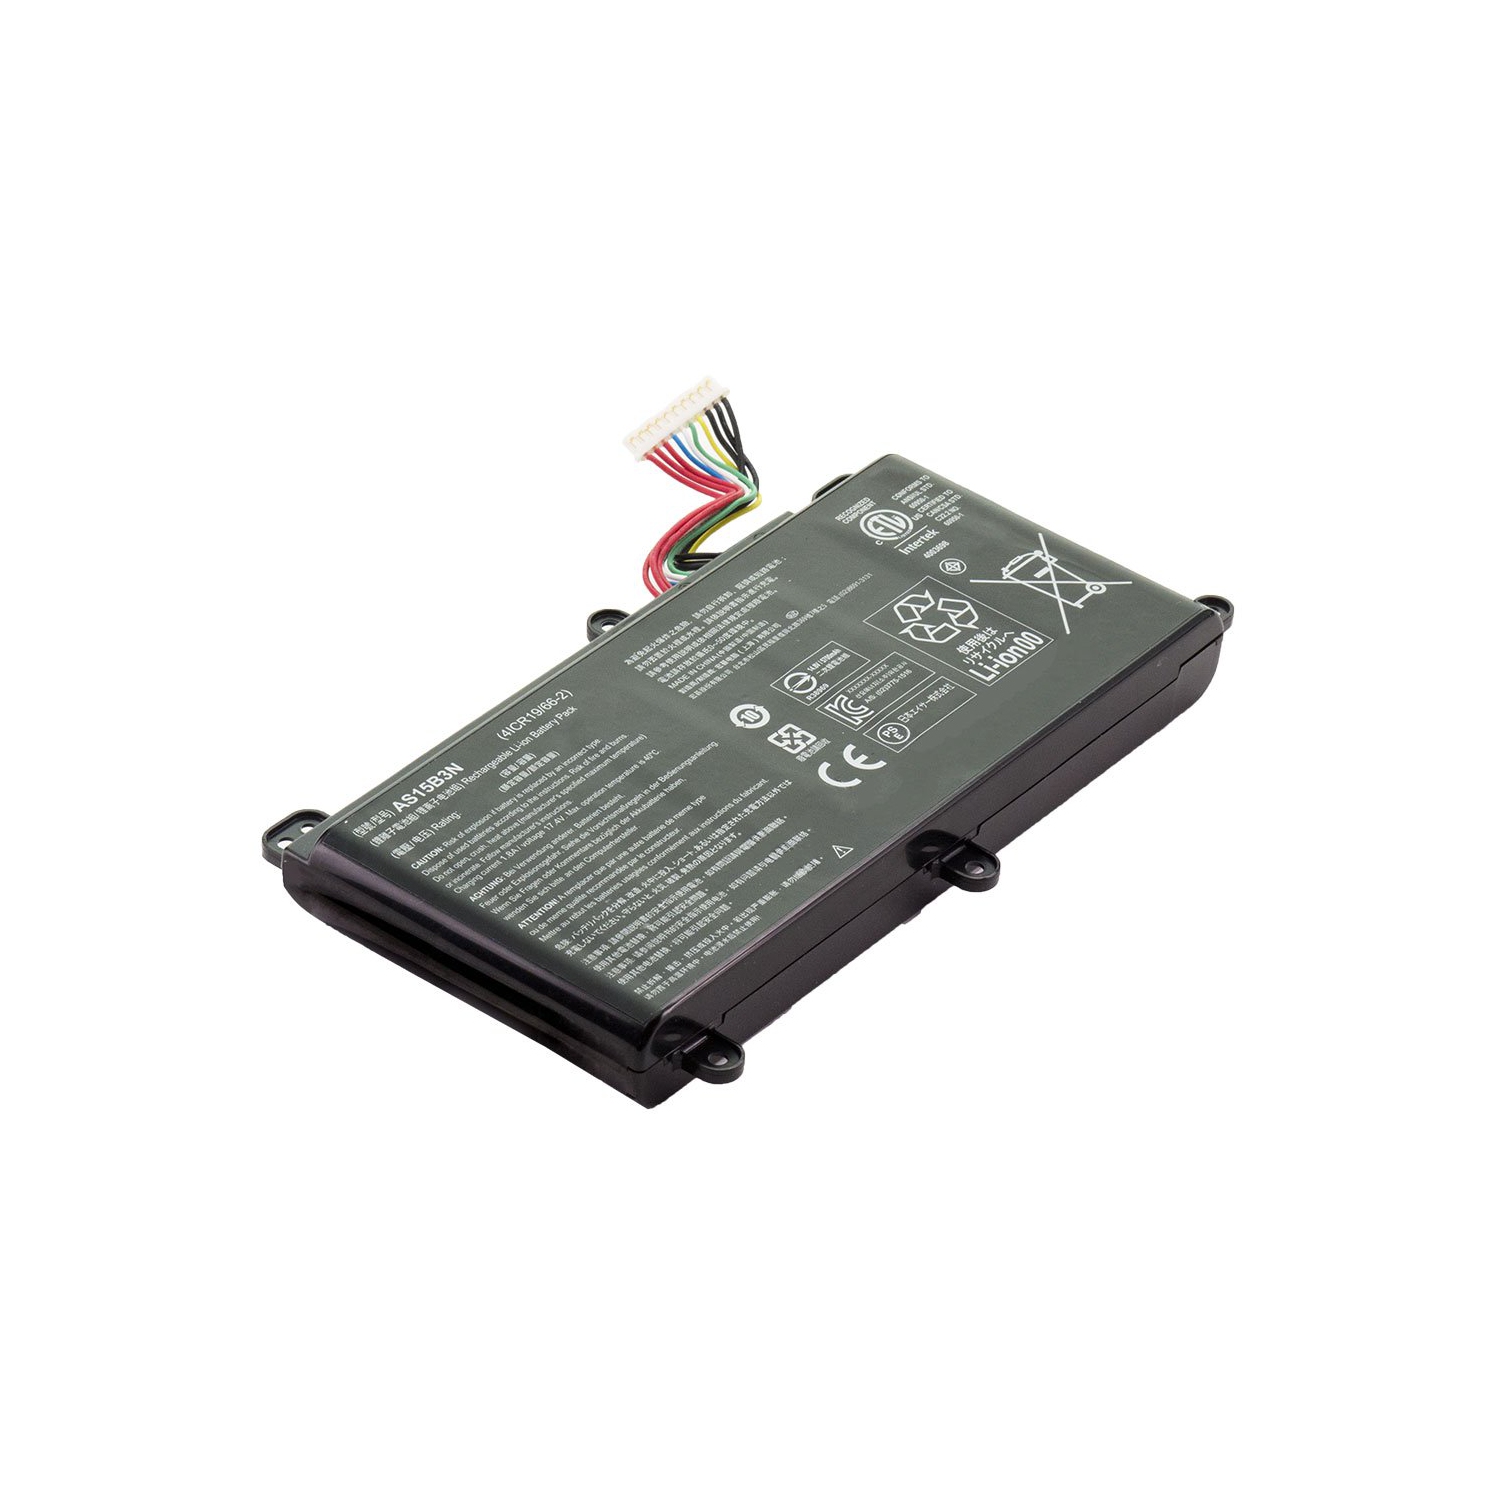 Laptop Battery Replacement for Acer Predator 15 G9-592-7308, AS15B3N, KT.00803.004, KT.00803.005